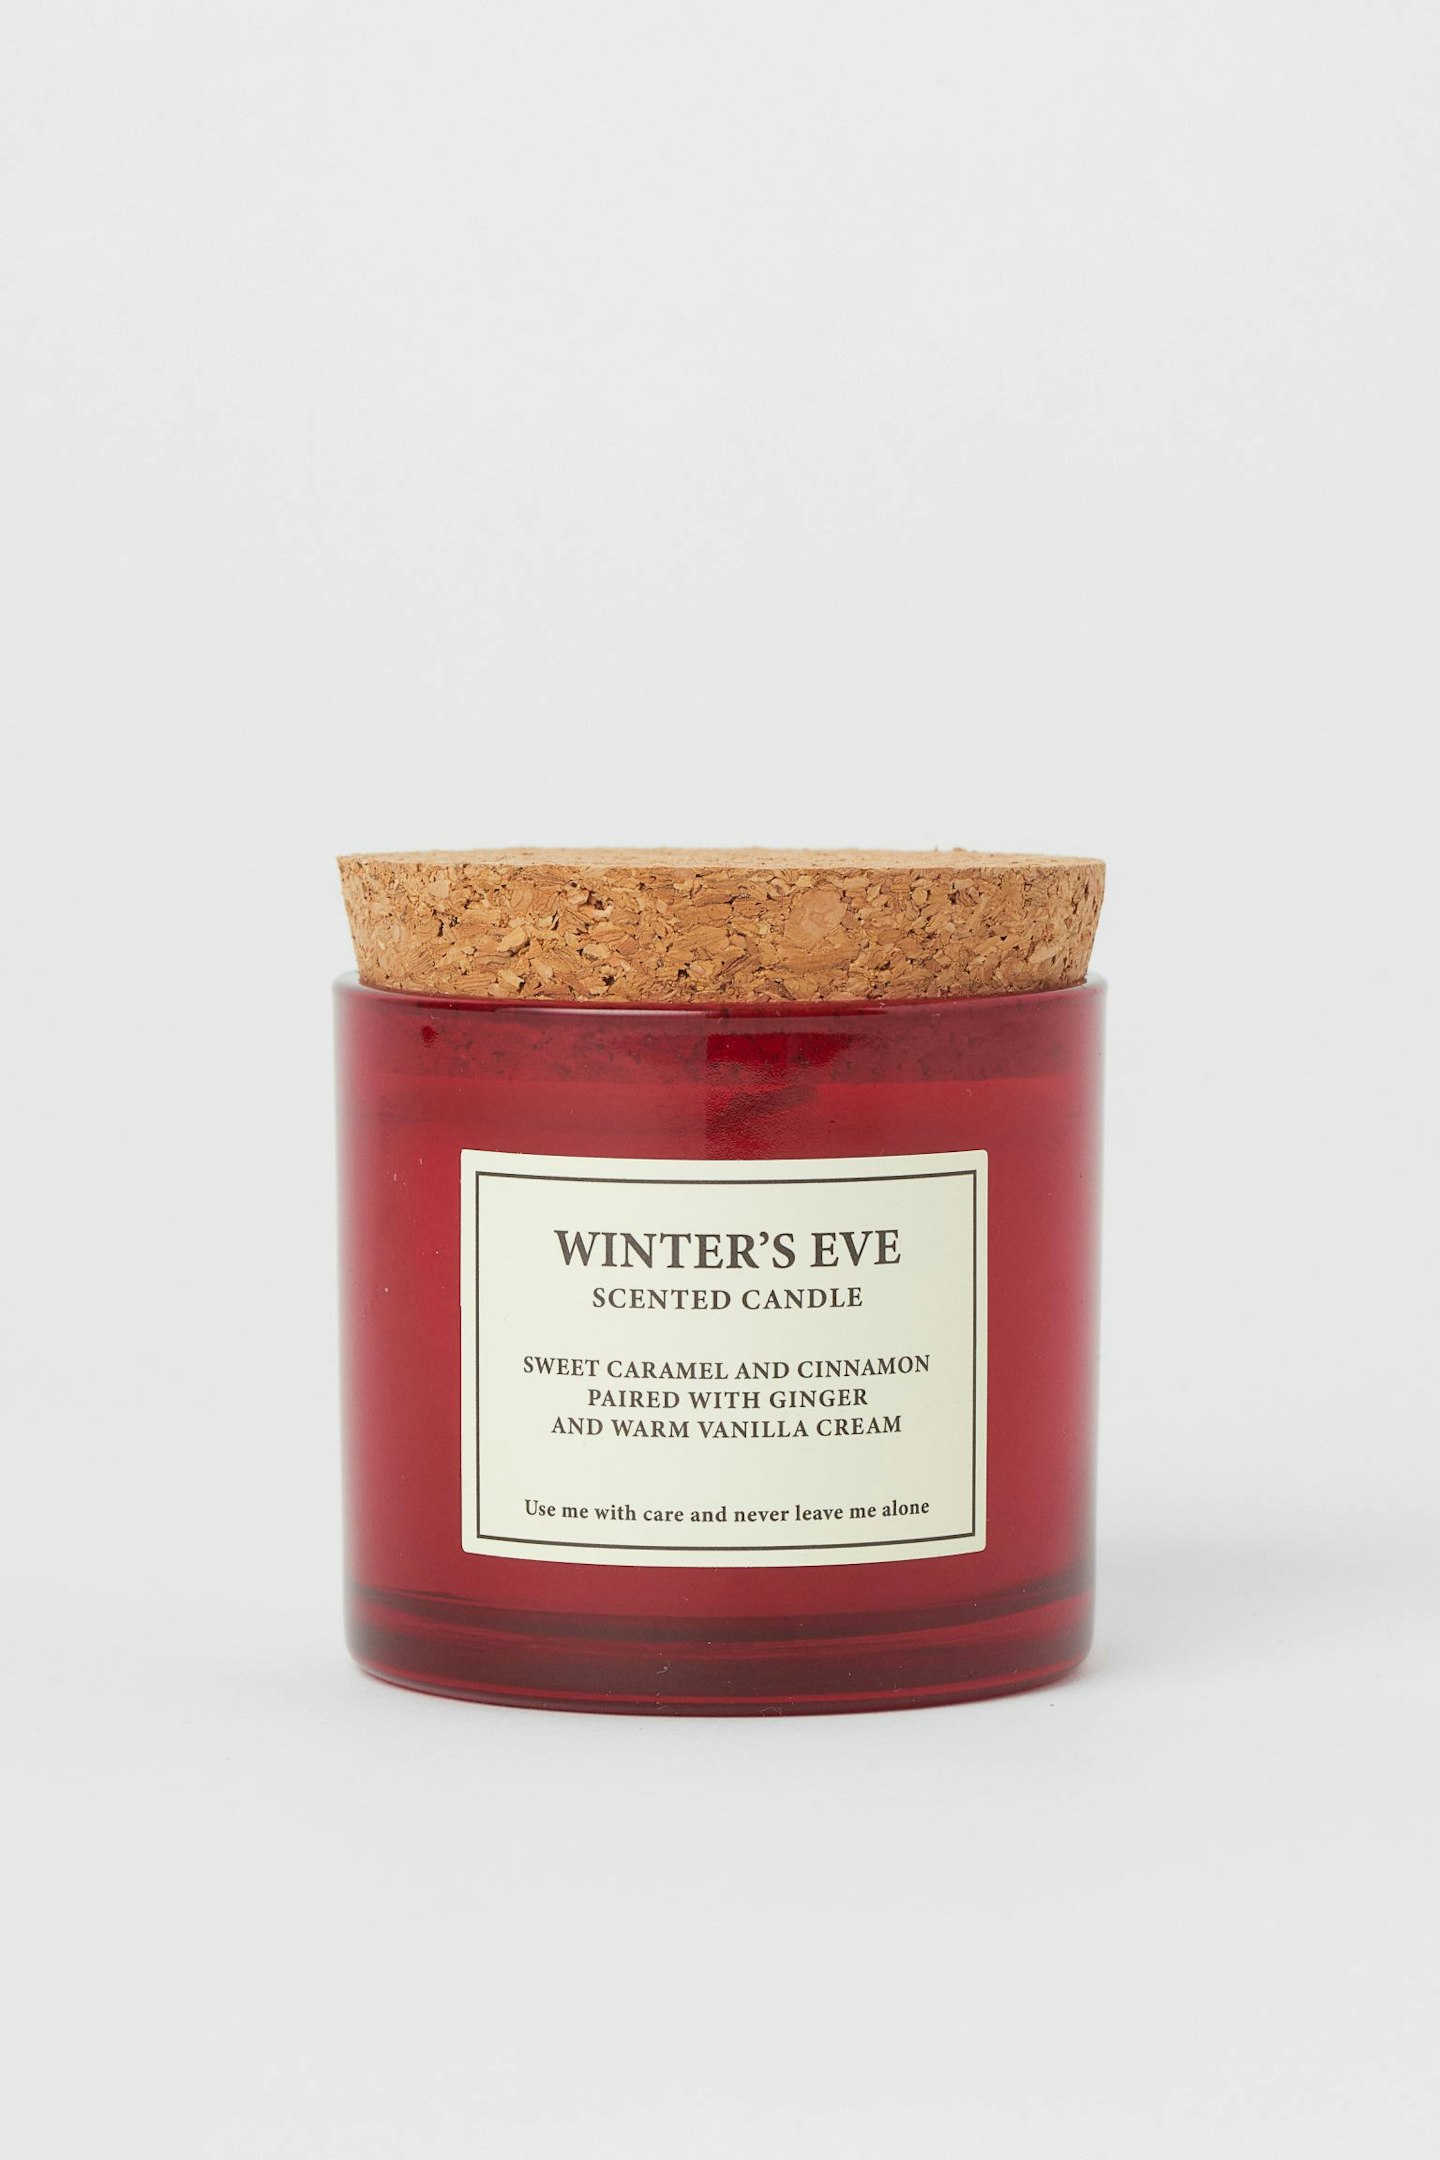 H&M, Cork-lid Scented Candle, £3.99